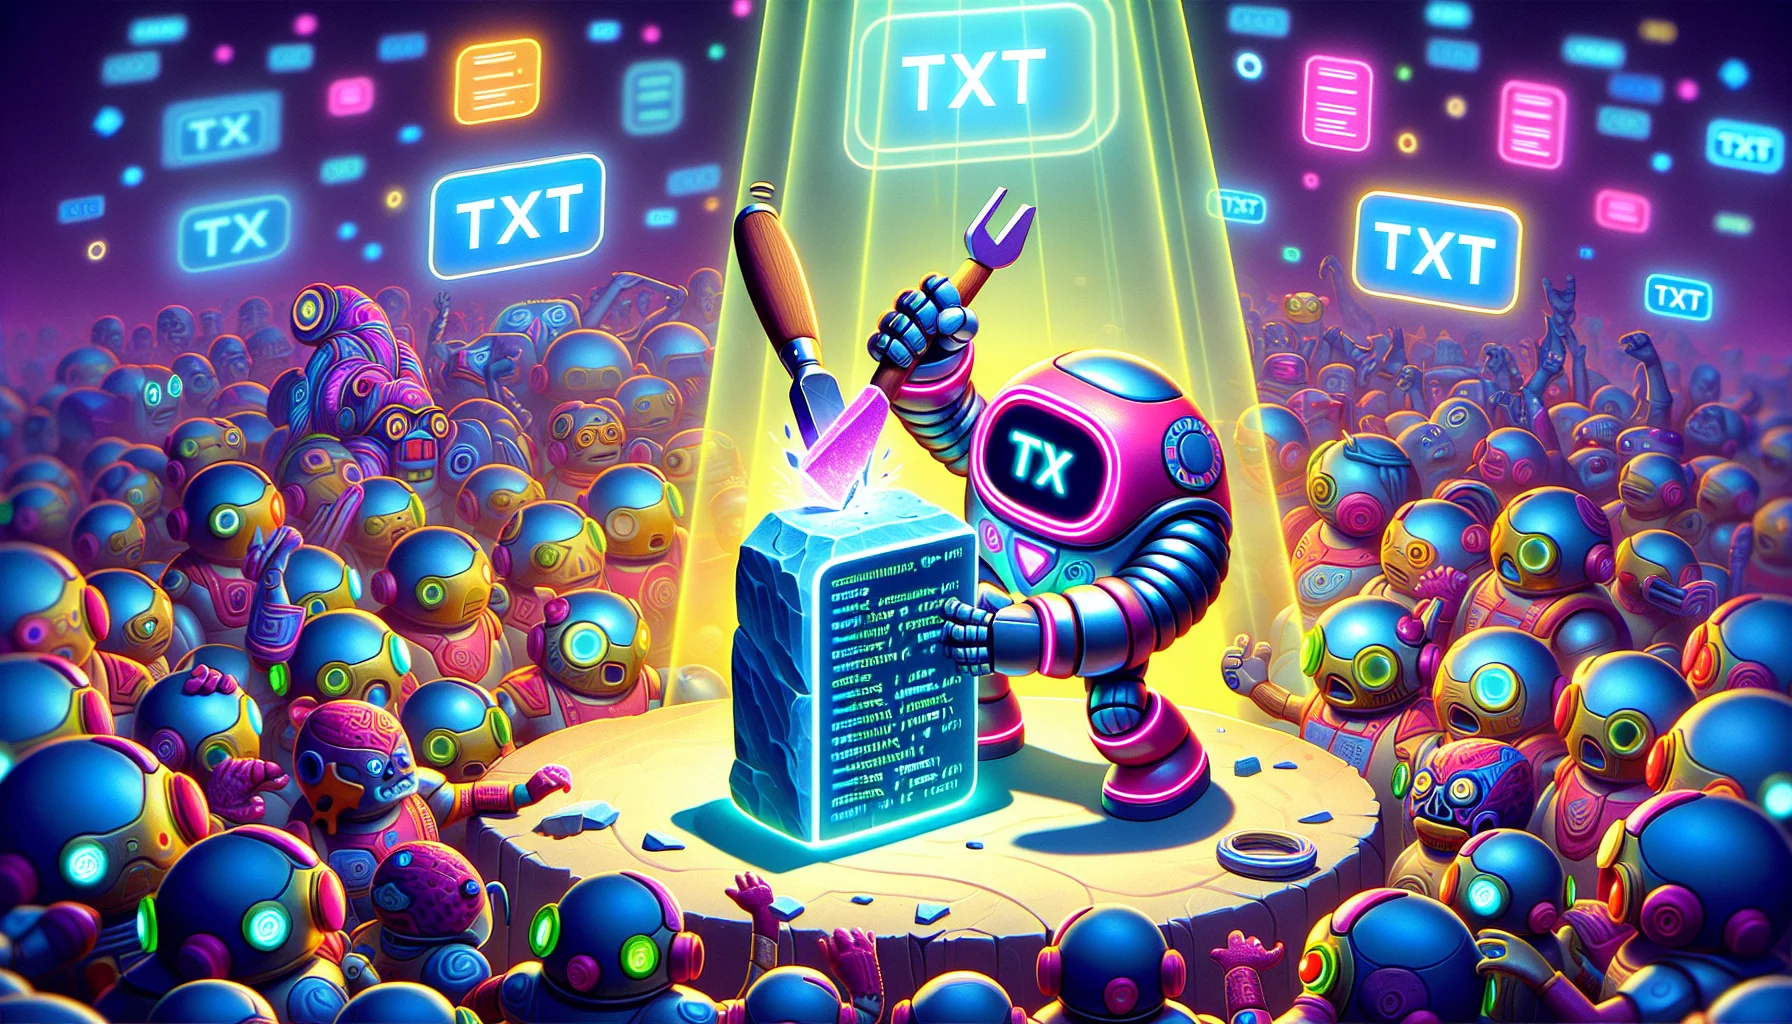 Generate a humorous and engaging image depicting the process of adding a TXT record on a web hosting platform. The scene could be set inside a lively virtual world, with anthropomorphic figures, perhaps as robots or fantastical creatures, ingeniously representing different components involved in the web hosting task in an exaggerated fashion. The central figure, a robot with bright neon coding symbols across its body, can be seen meticulously chiseling a shining 'TXT' onto a digital stone tablet, symbolizing the addition of a TXT record. The background is vibrant with other fantastical creatures cheering or observing in awe.